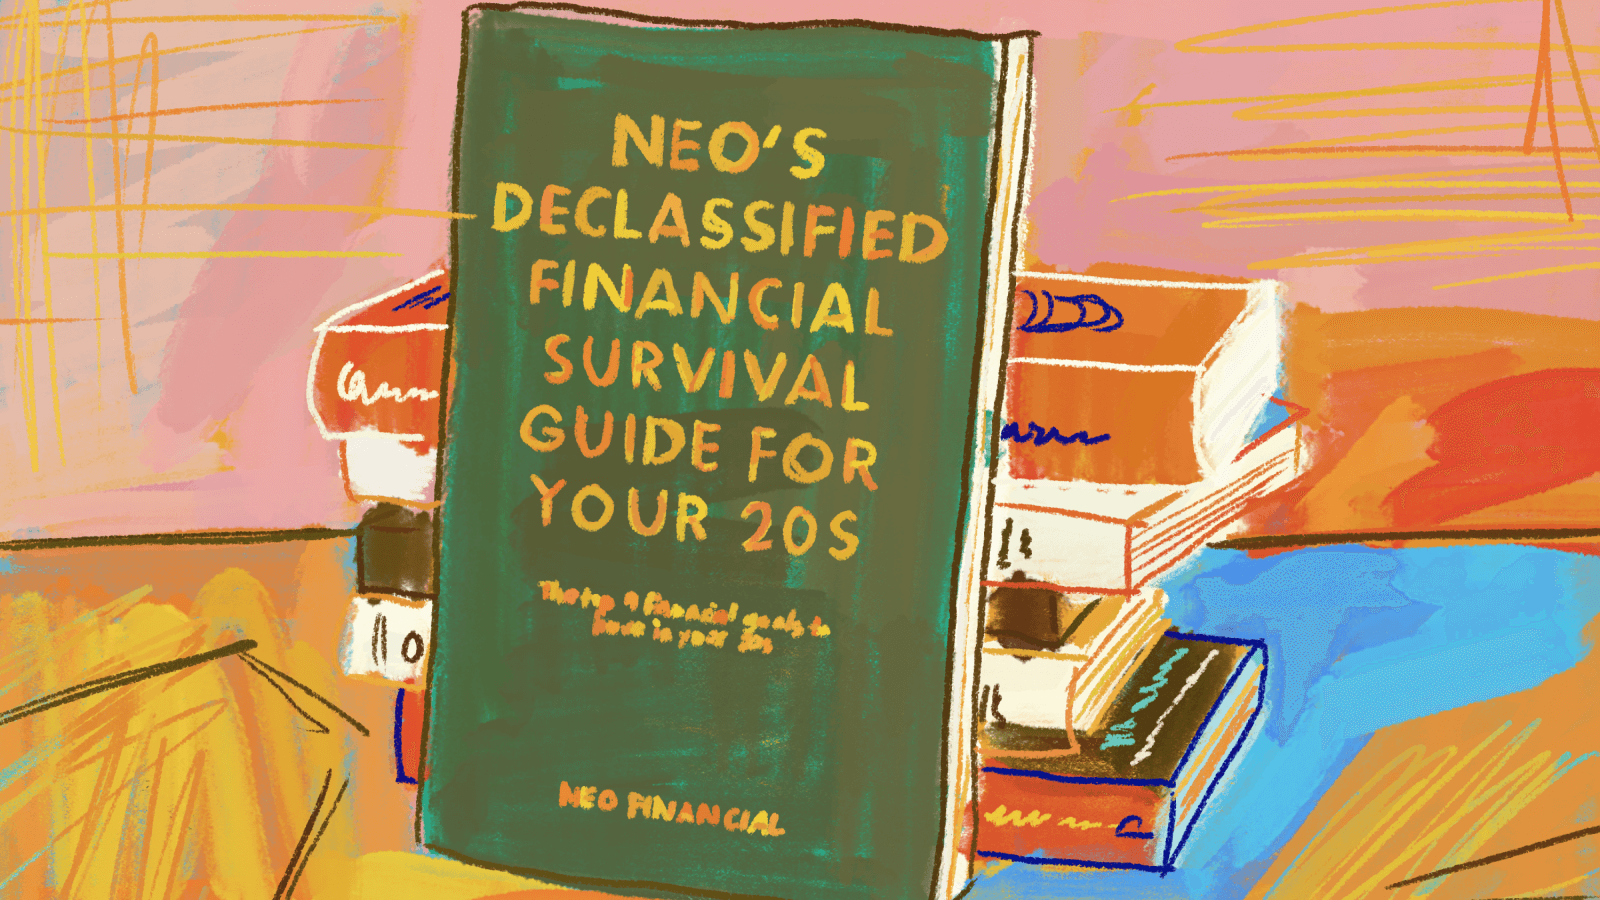 Neo’s declassified financial survival guide for your 20s